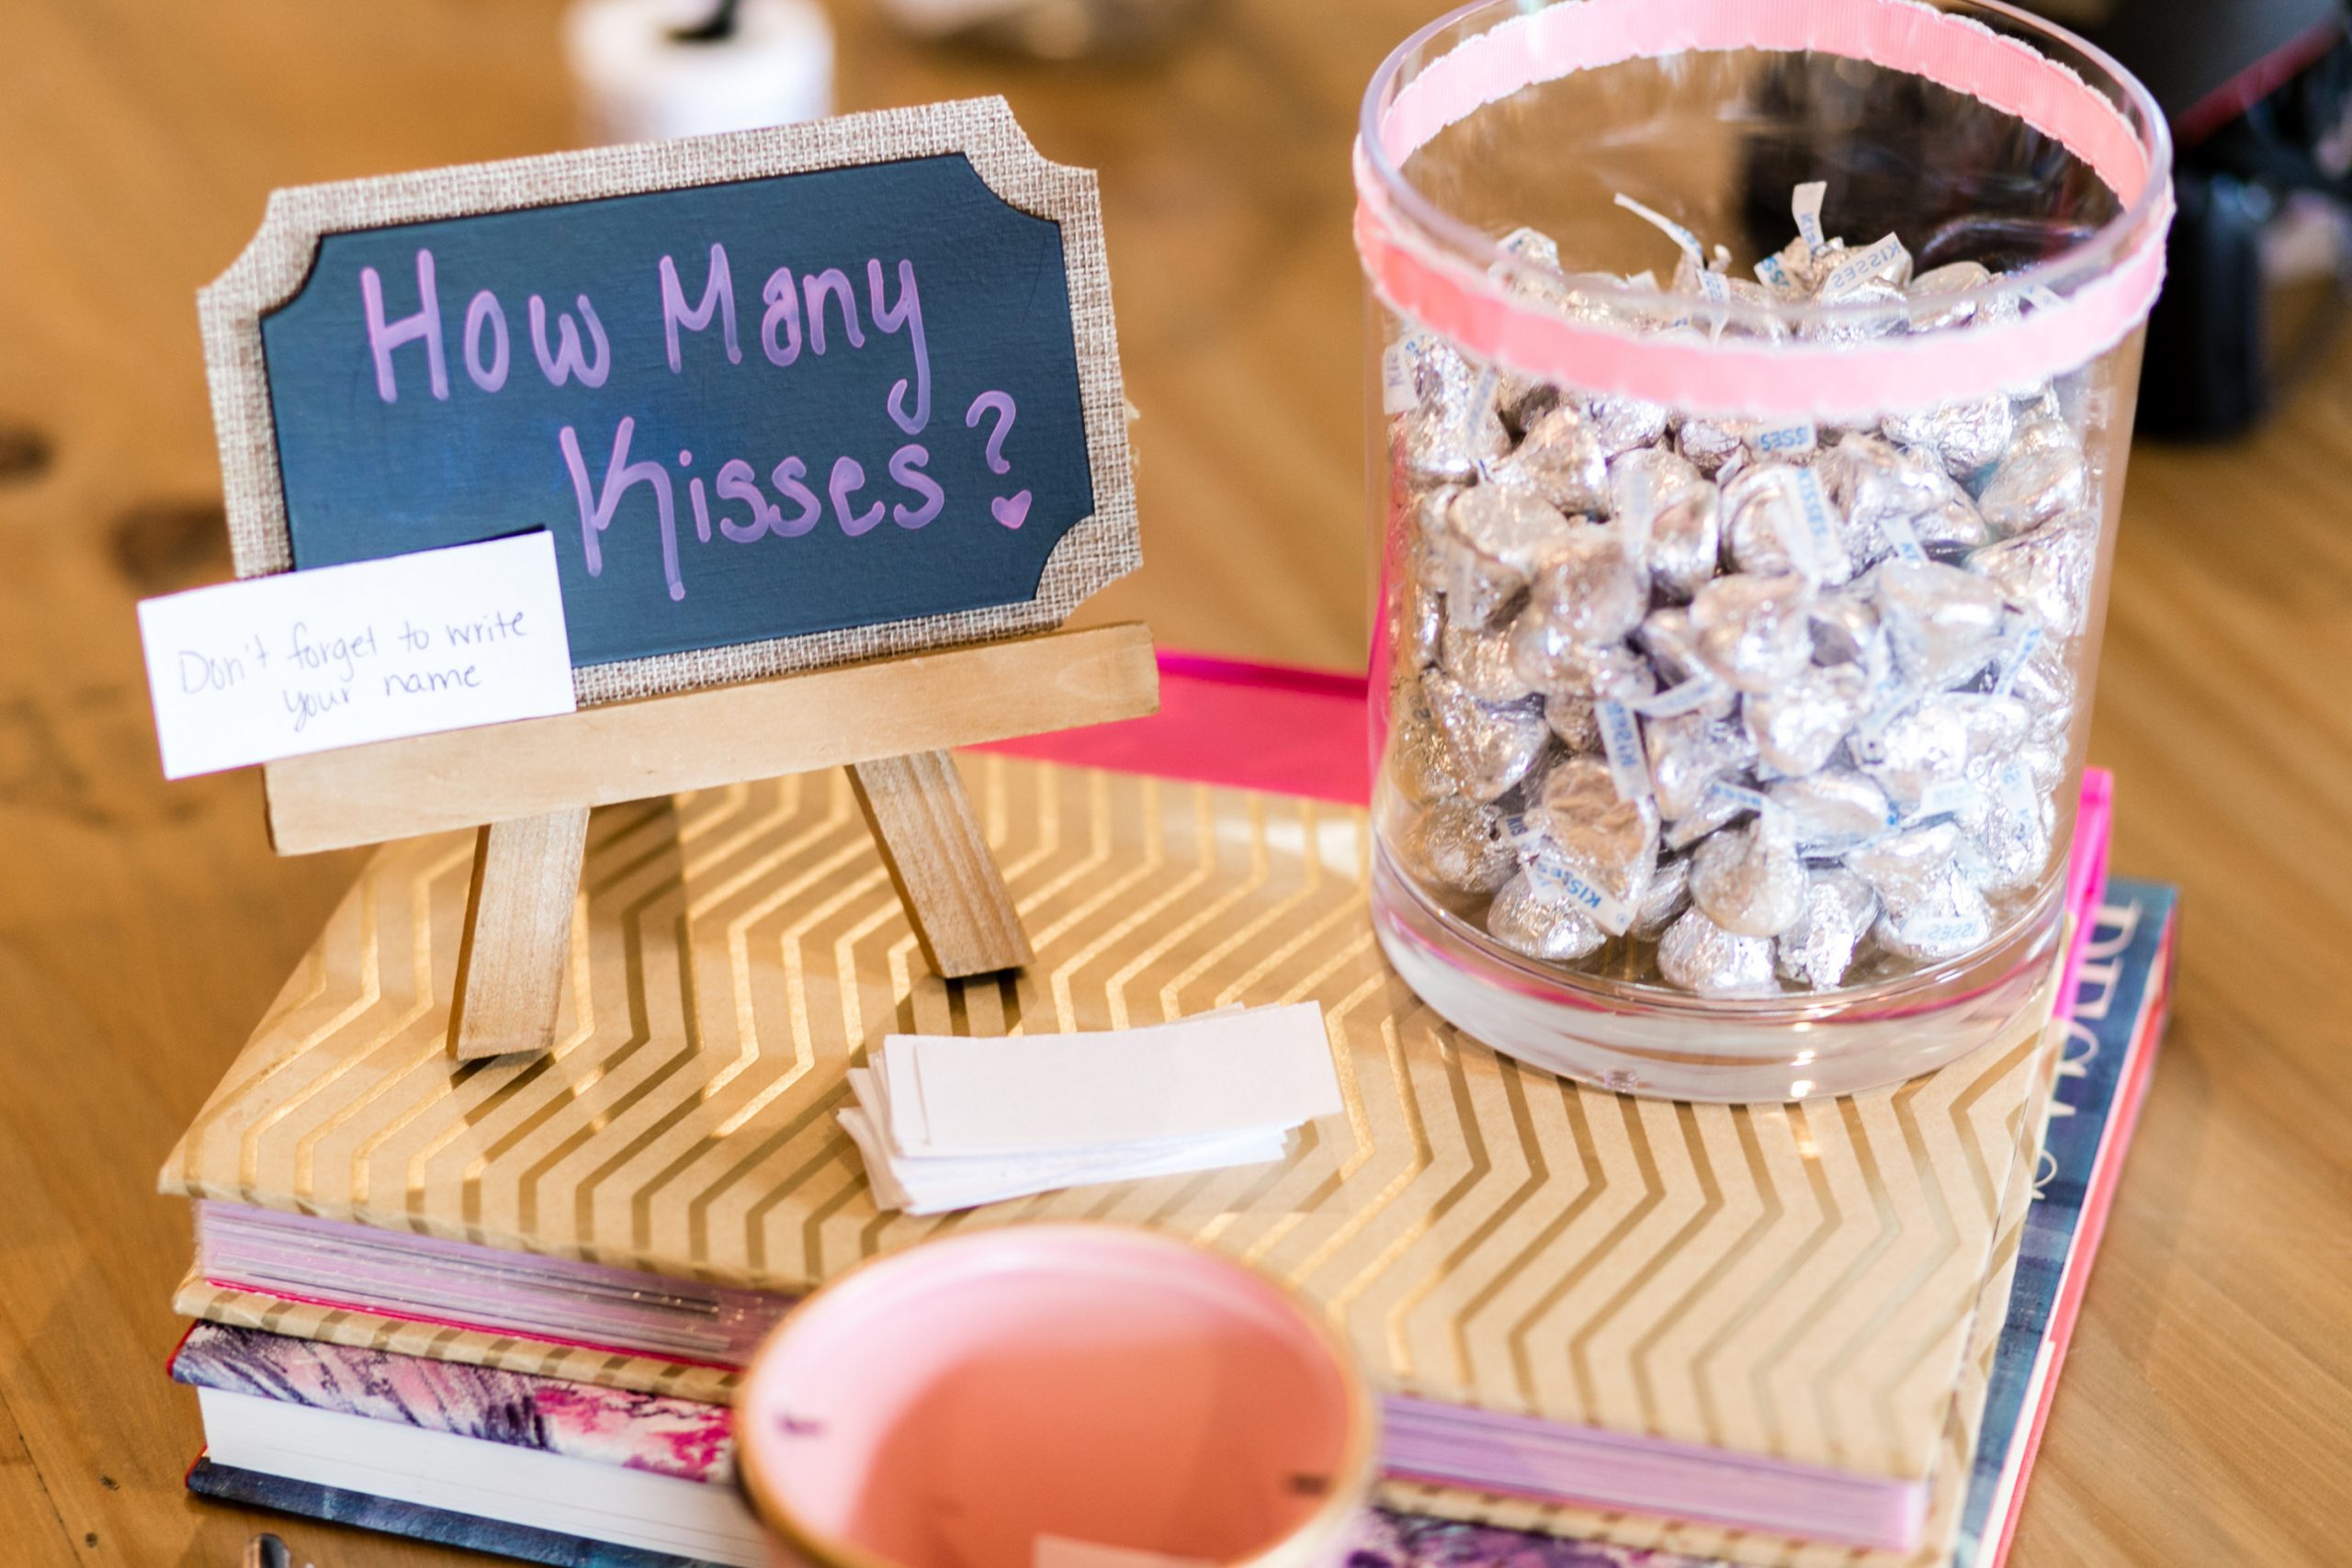 Bridal Shower Ideas. A chalkboard sign reading how many kisses with a clear glass vase full of hershey kisses. Bridal shower games.